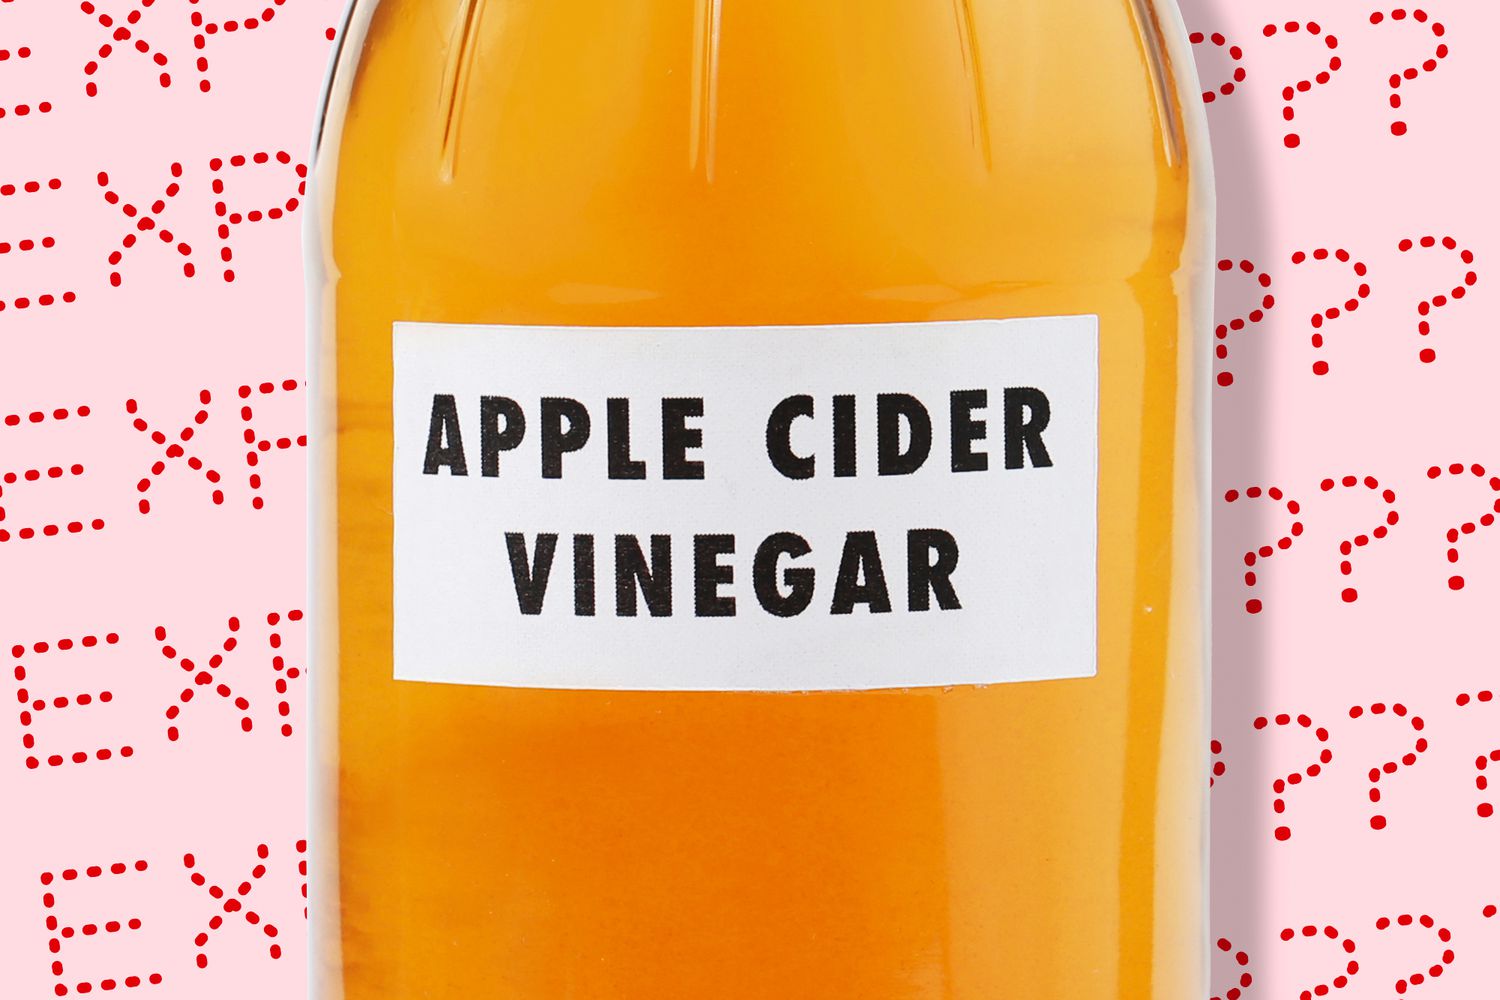 A bottle of Apple Cider Vinegar with expiration date in the background